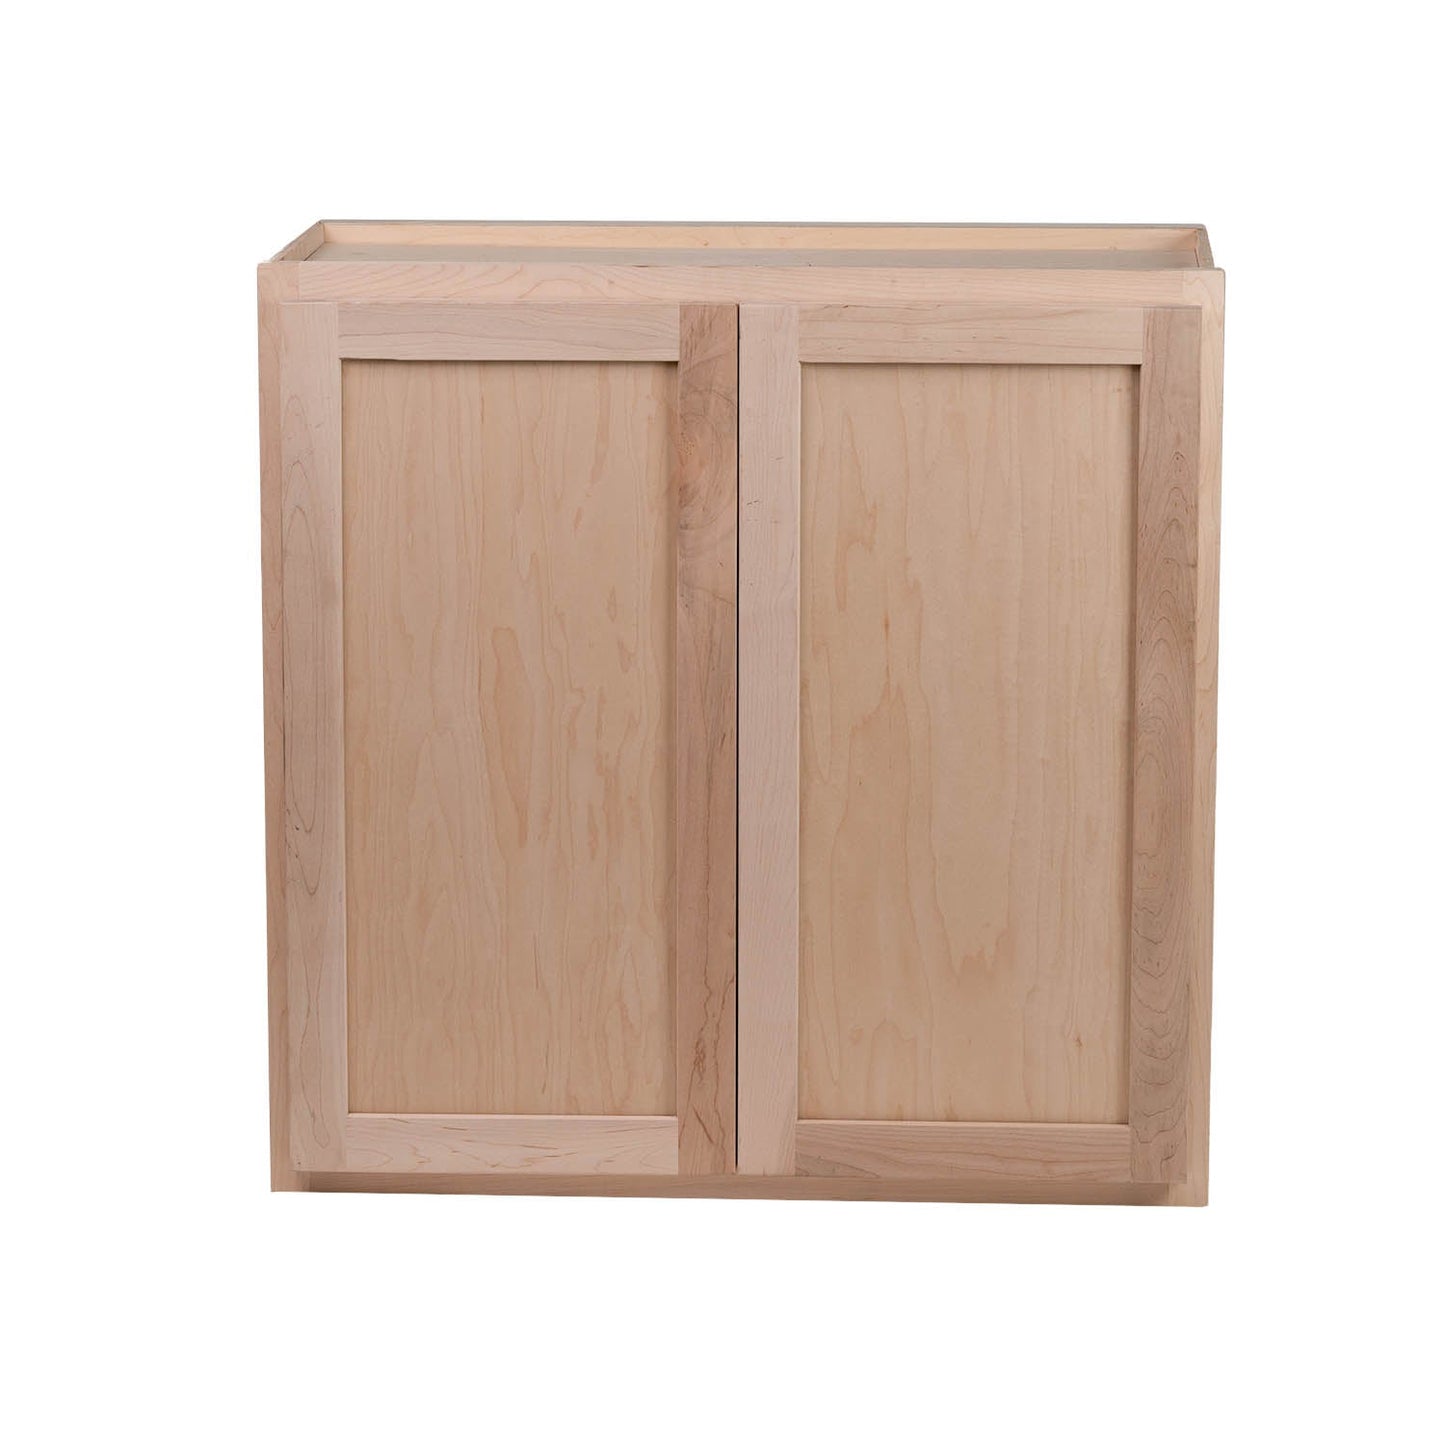 Backwoods Cabinetry RTA (Ready-to-Assemble) WD3630.BUTT - Raw Maple 36"Wx30"Hx12"D Wall Cabinet